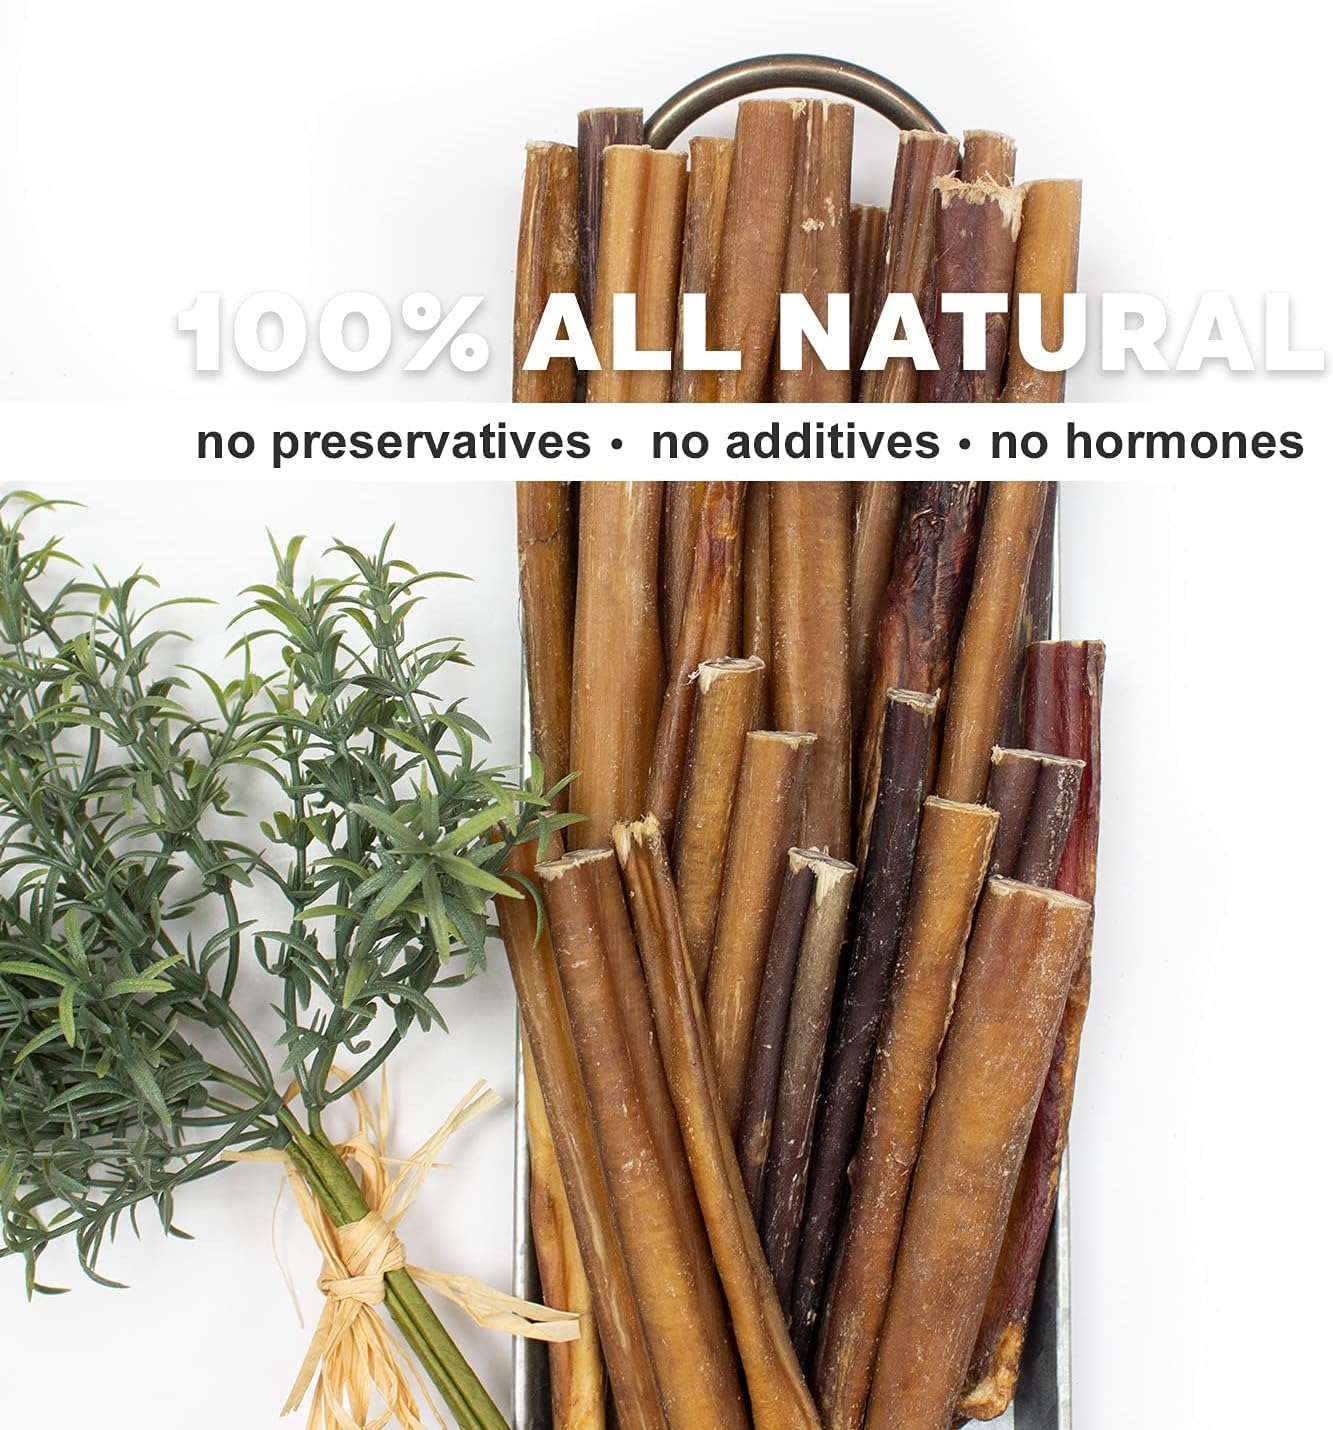 Downtown Pet Supply 6-inch Bully Sticks for Dogs, Pack of 48 - Single Ingredient, Nutrient-Rich and Odor Free Bully Sticks for Dogs - Rawhide Free Dog Chews Long Lasting and Non-Splintering : Pet Rawhide Treat Sticks : Pet Supplies